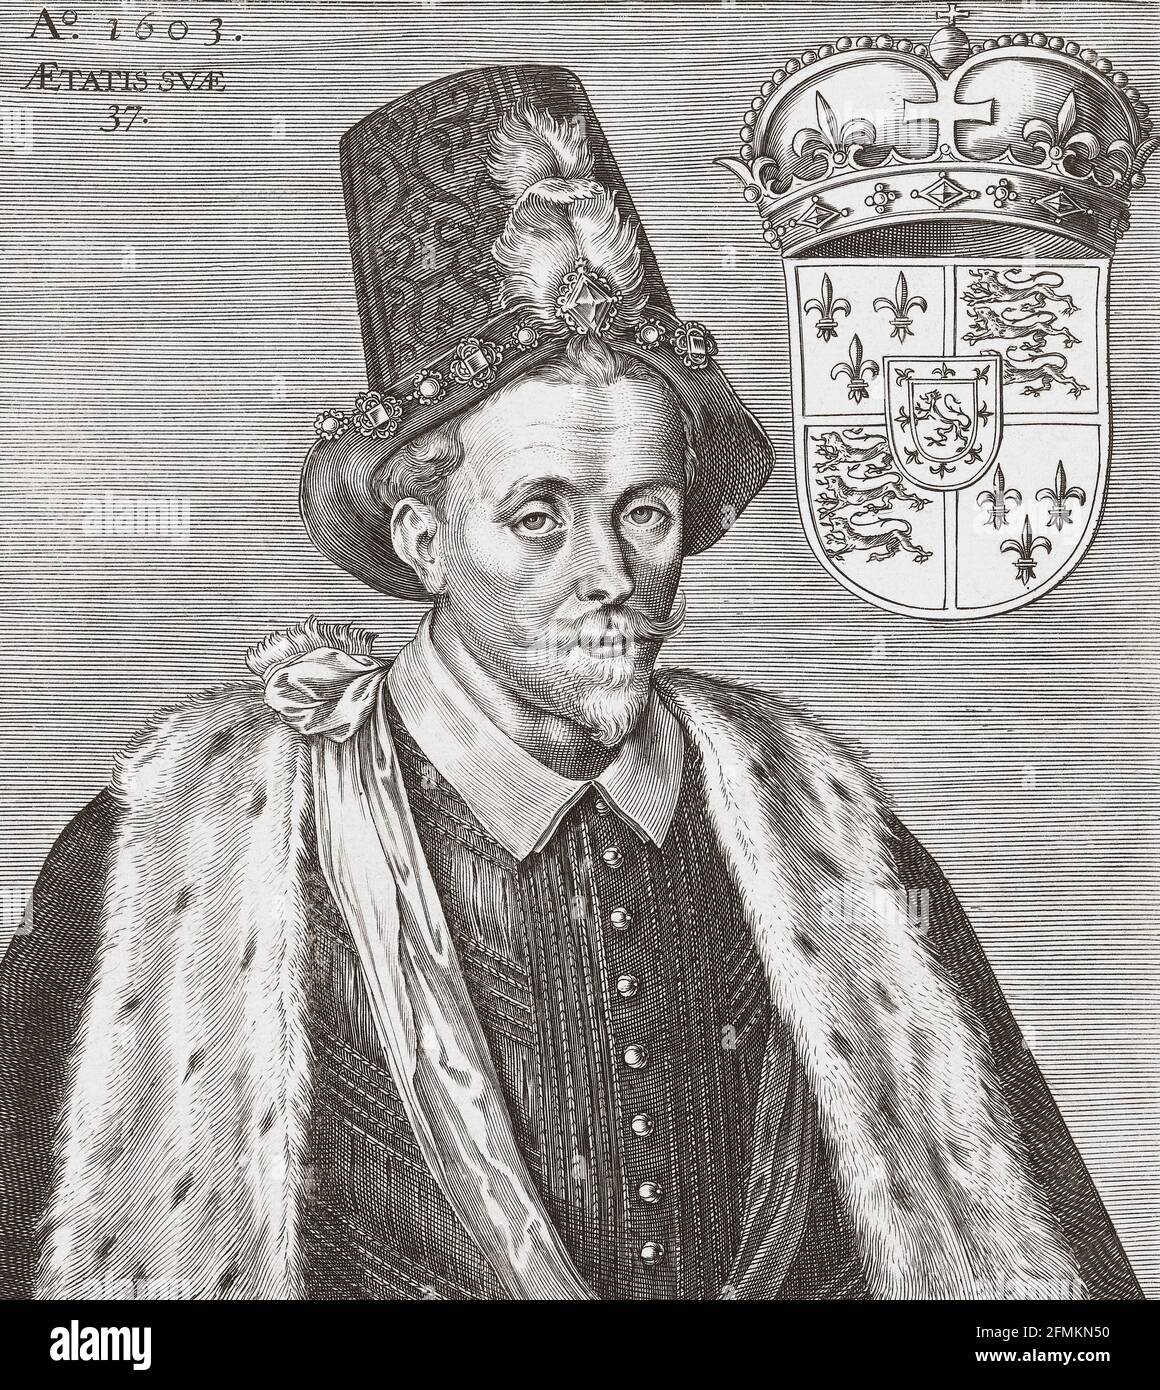 James VI and I, 1566 – 1625. King of Scotland as James VI from 24 July 1567 and King of England and Ireland as James I from 24 March 1603 - 1625.  After an early 17th century engraving. Stock Photo